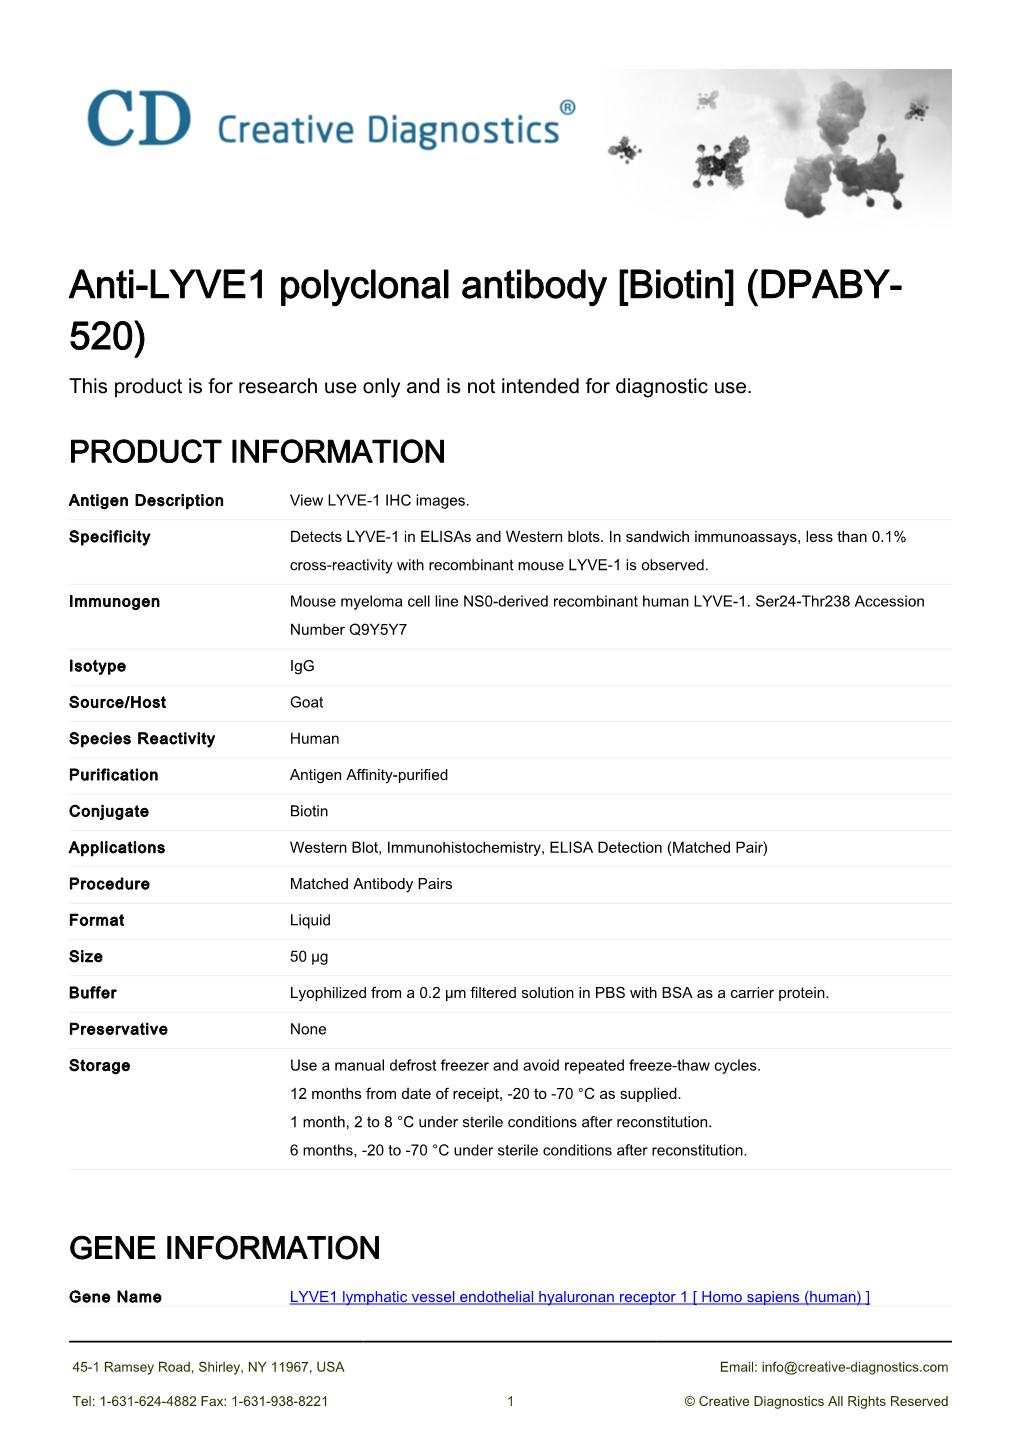 Anti-LYVE1 Polyclonal Antibody [Biotin] (DPABY- 520) This Product Is for Research Use Only and Is Not Intended for Diagnostic Use